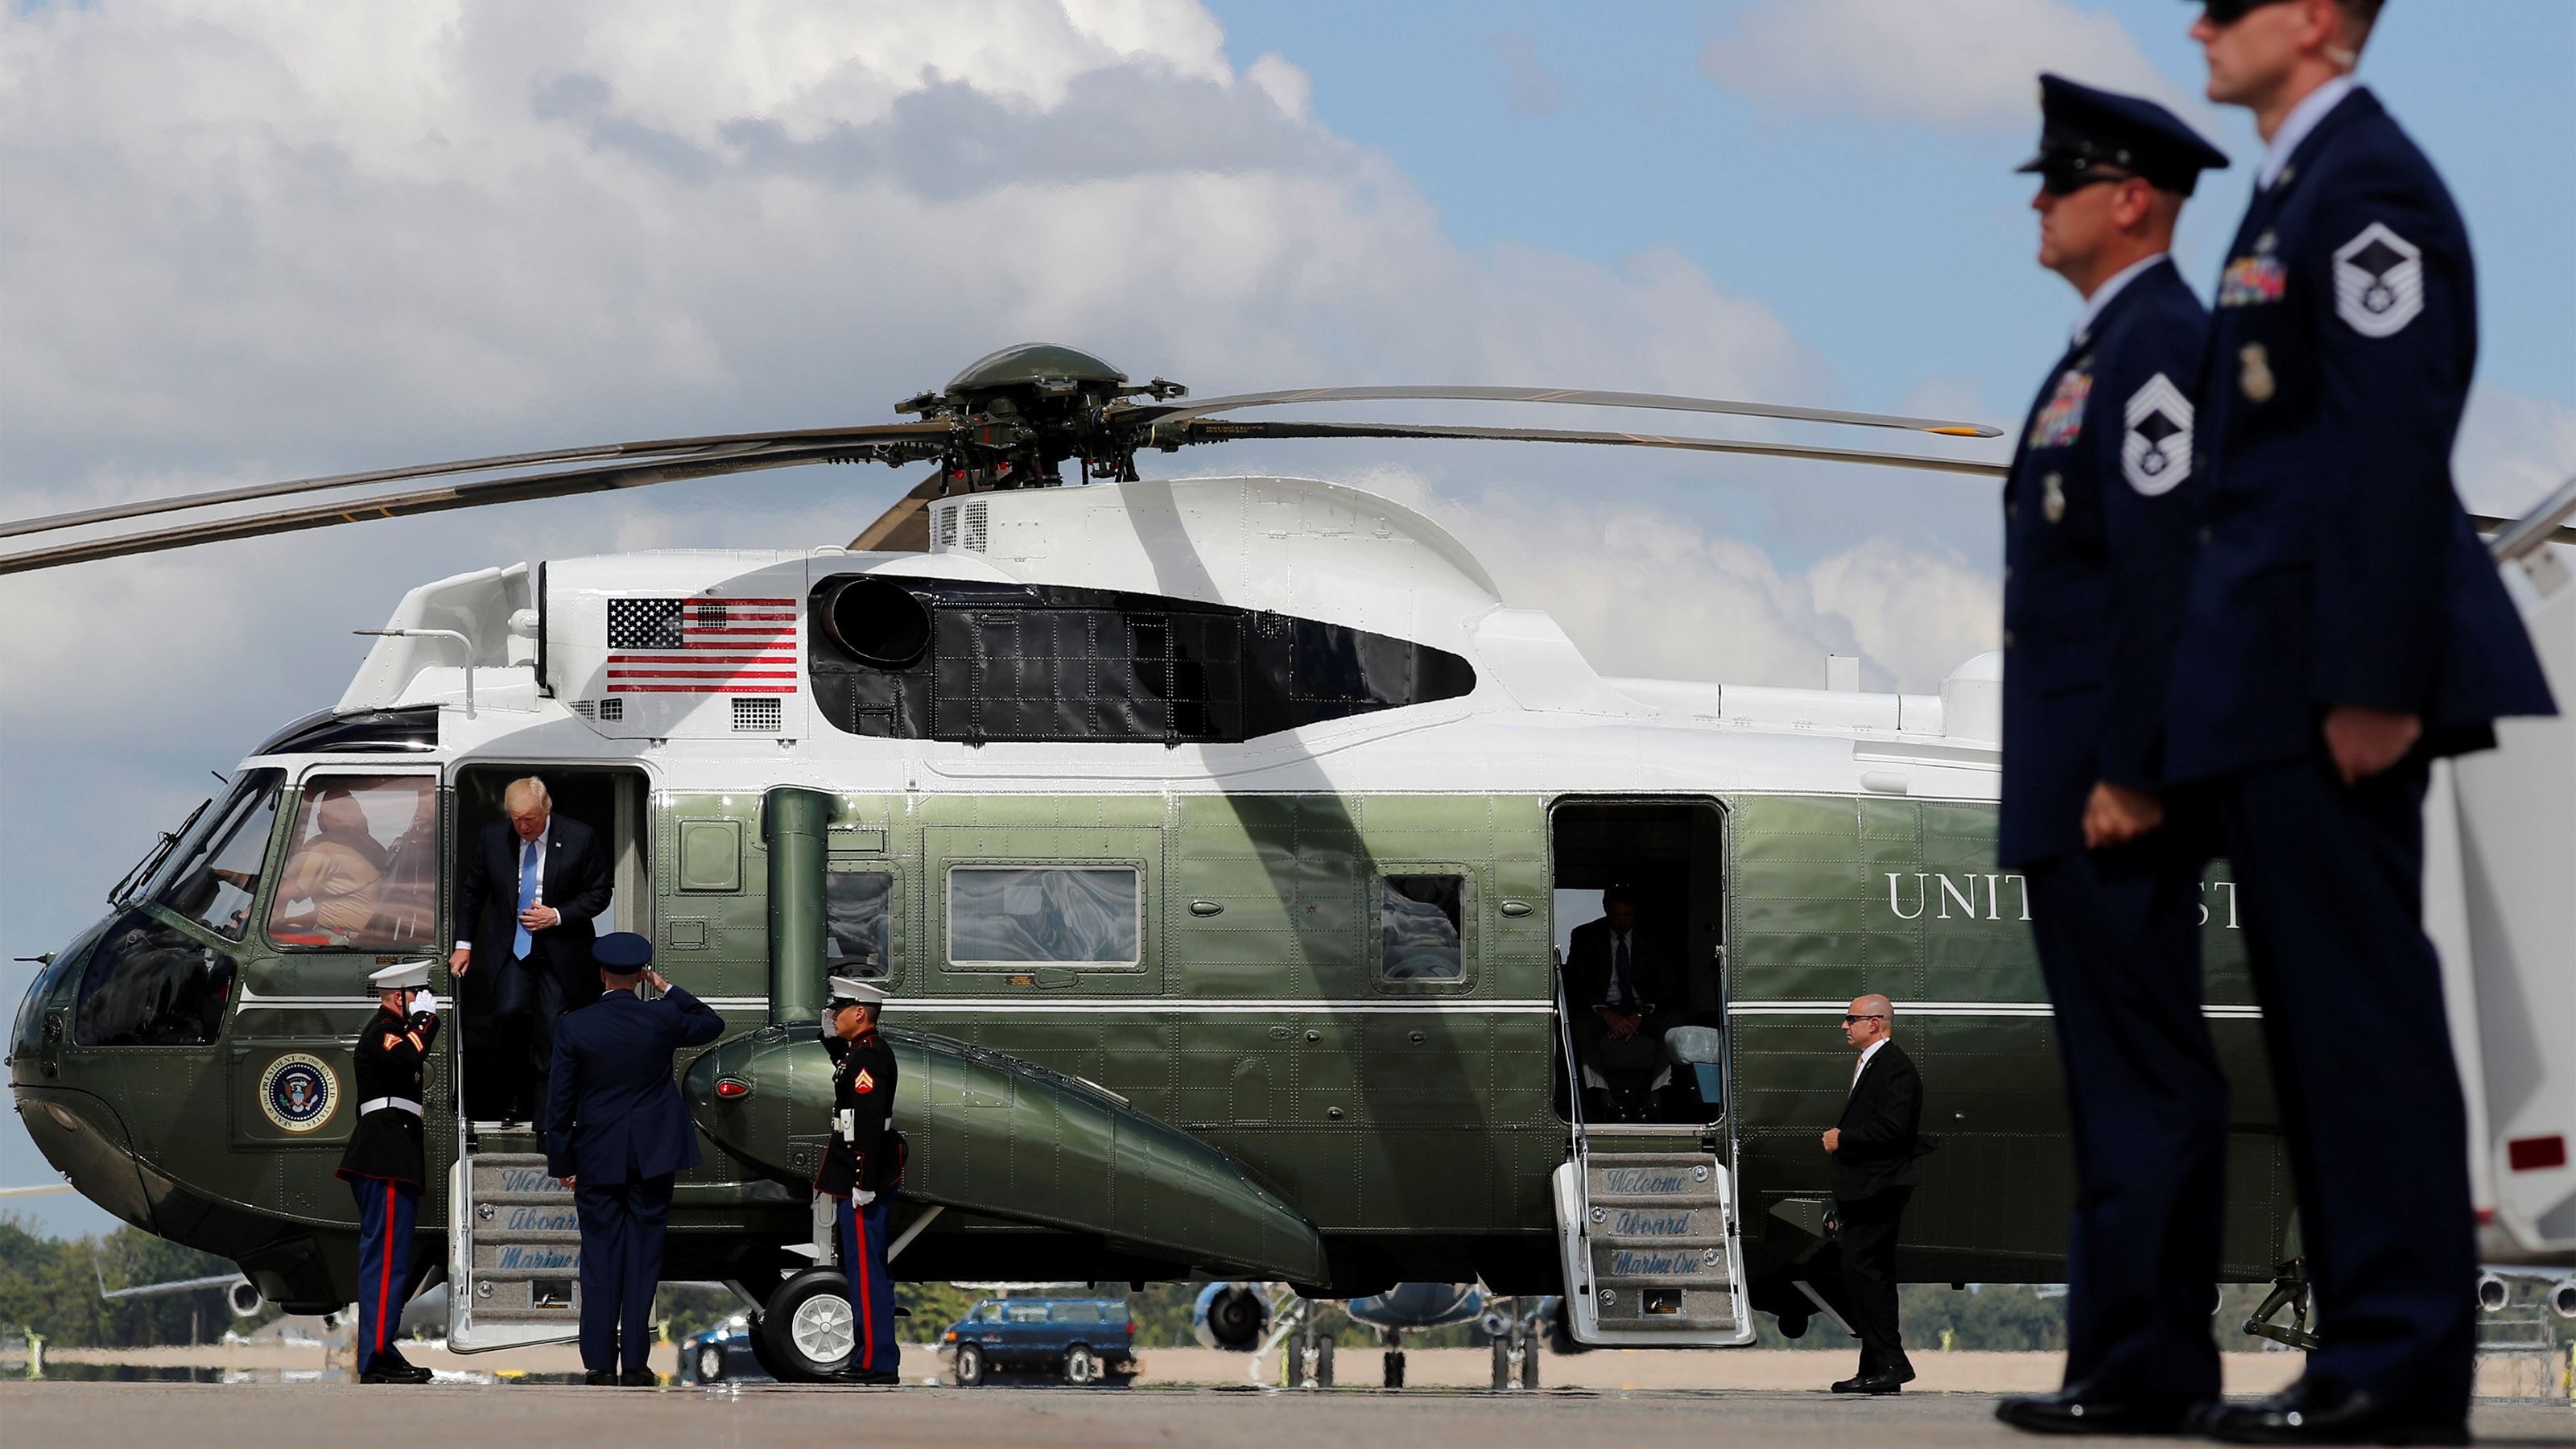 President Donald Trump on the Marine One helicopter on Sept. 27, 2017. Photo by Jonathan Ernst, Reuters.